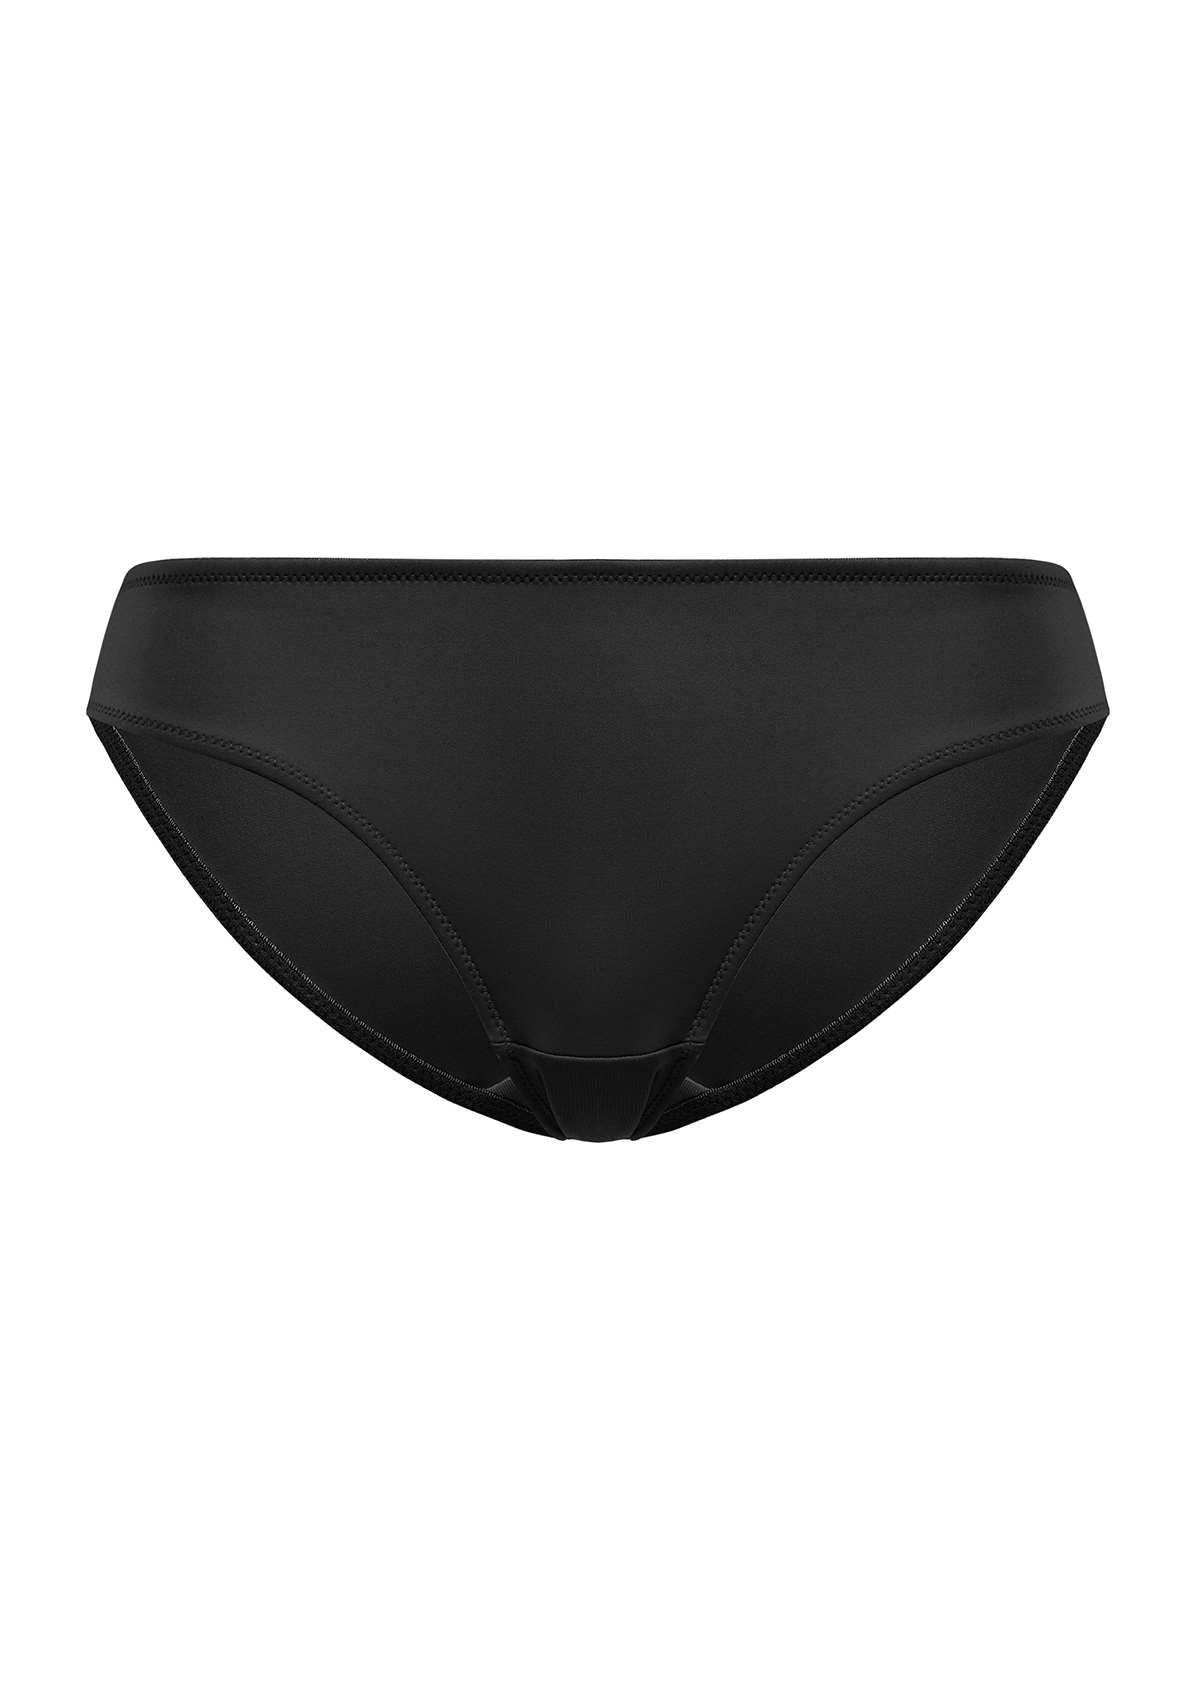 HSIA Patricia Smooth Classic Soft Stretch Panty - Everyday Comfort - L / Black